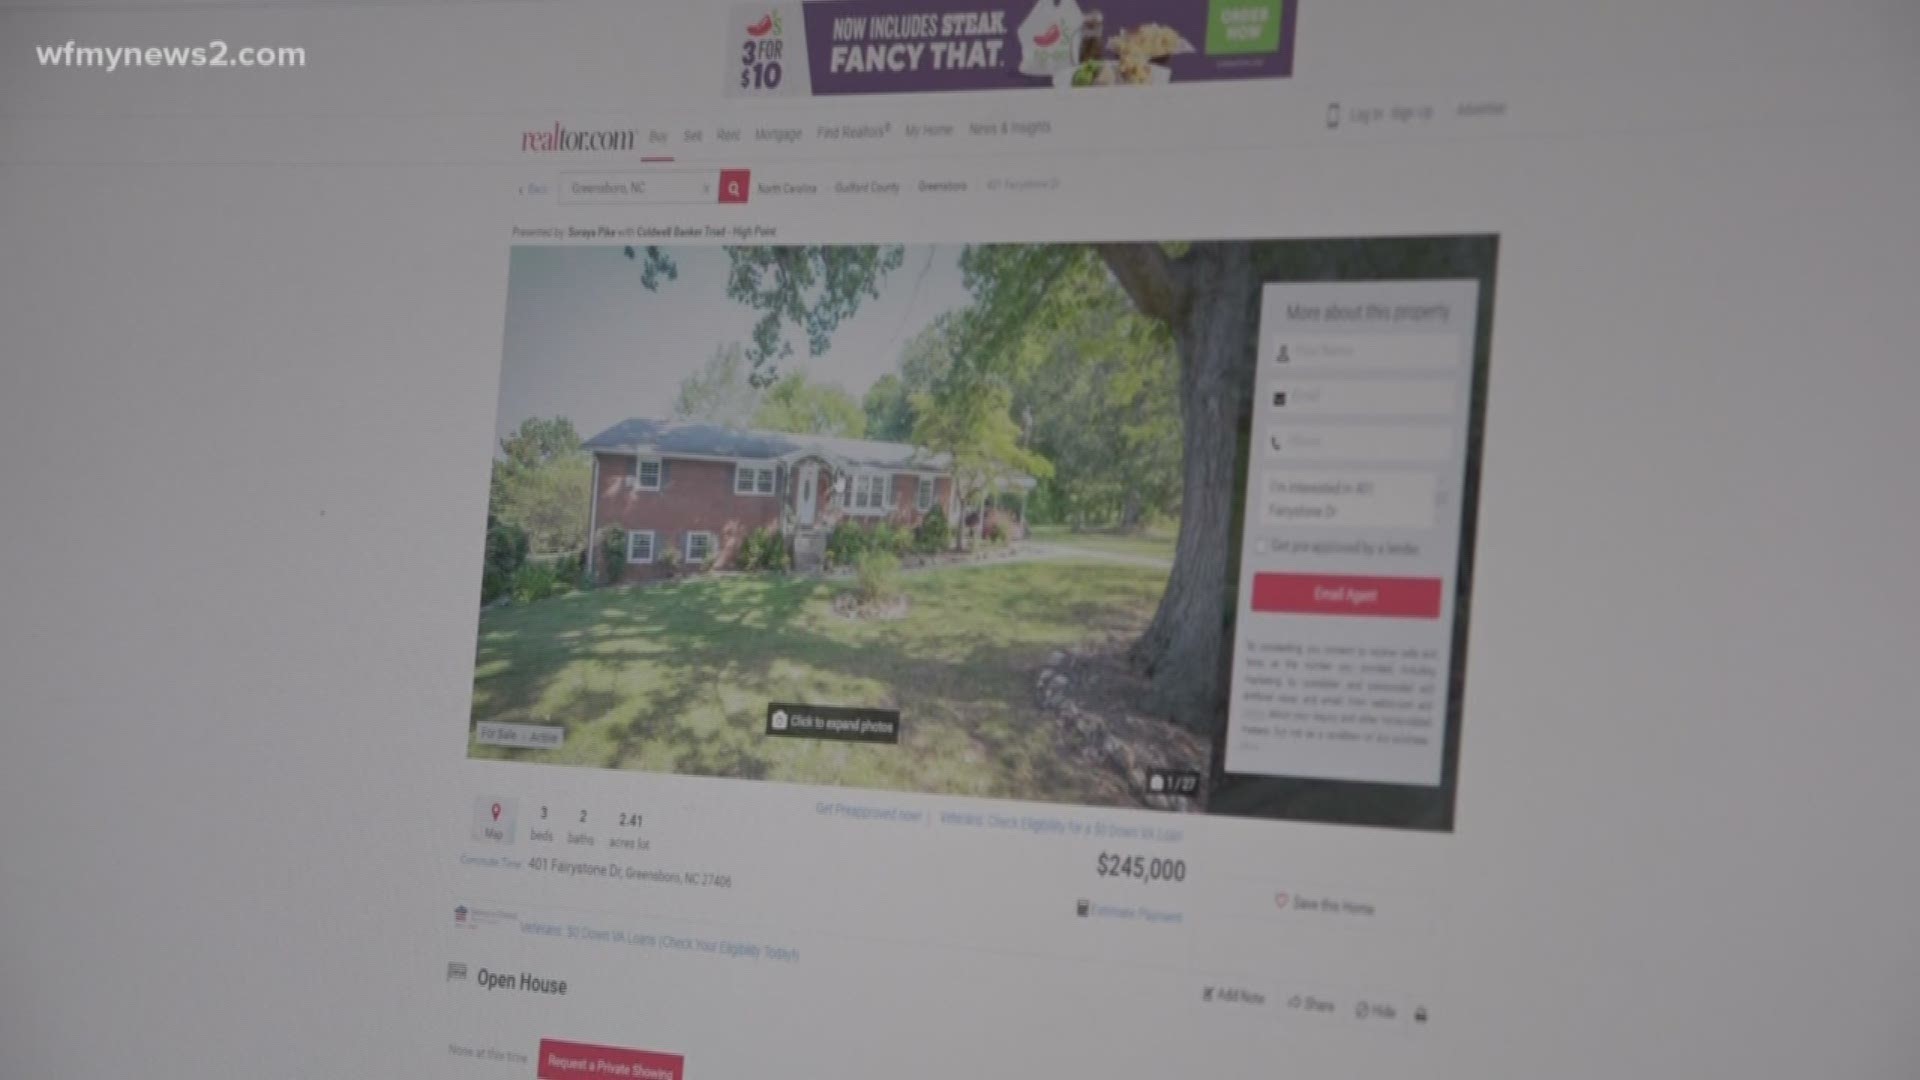 The owner's property was listed at $248,000, but much of the information online was connected to the land next to their home.